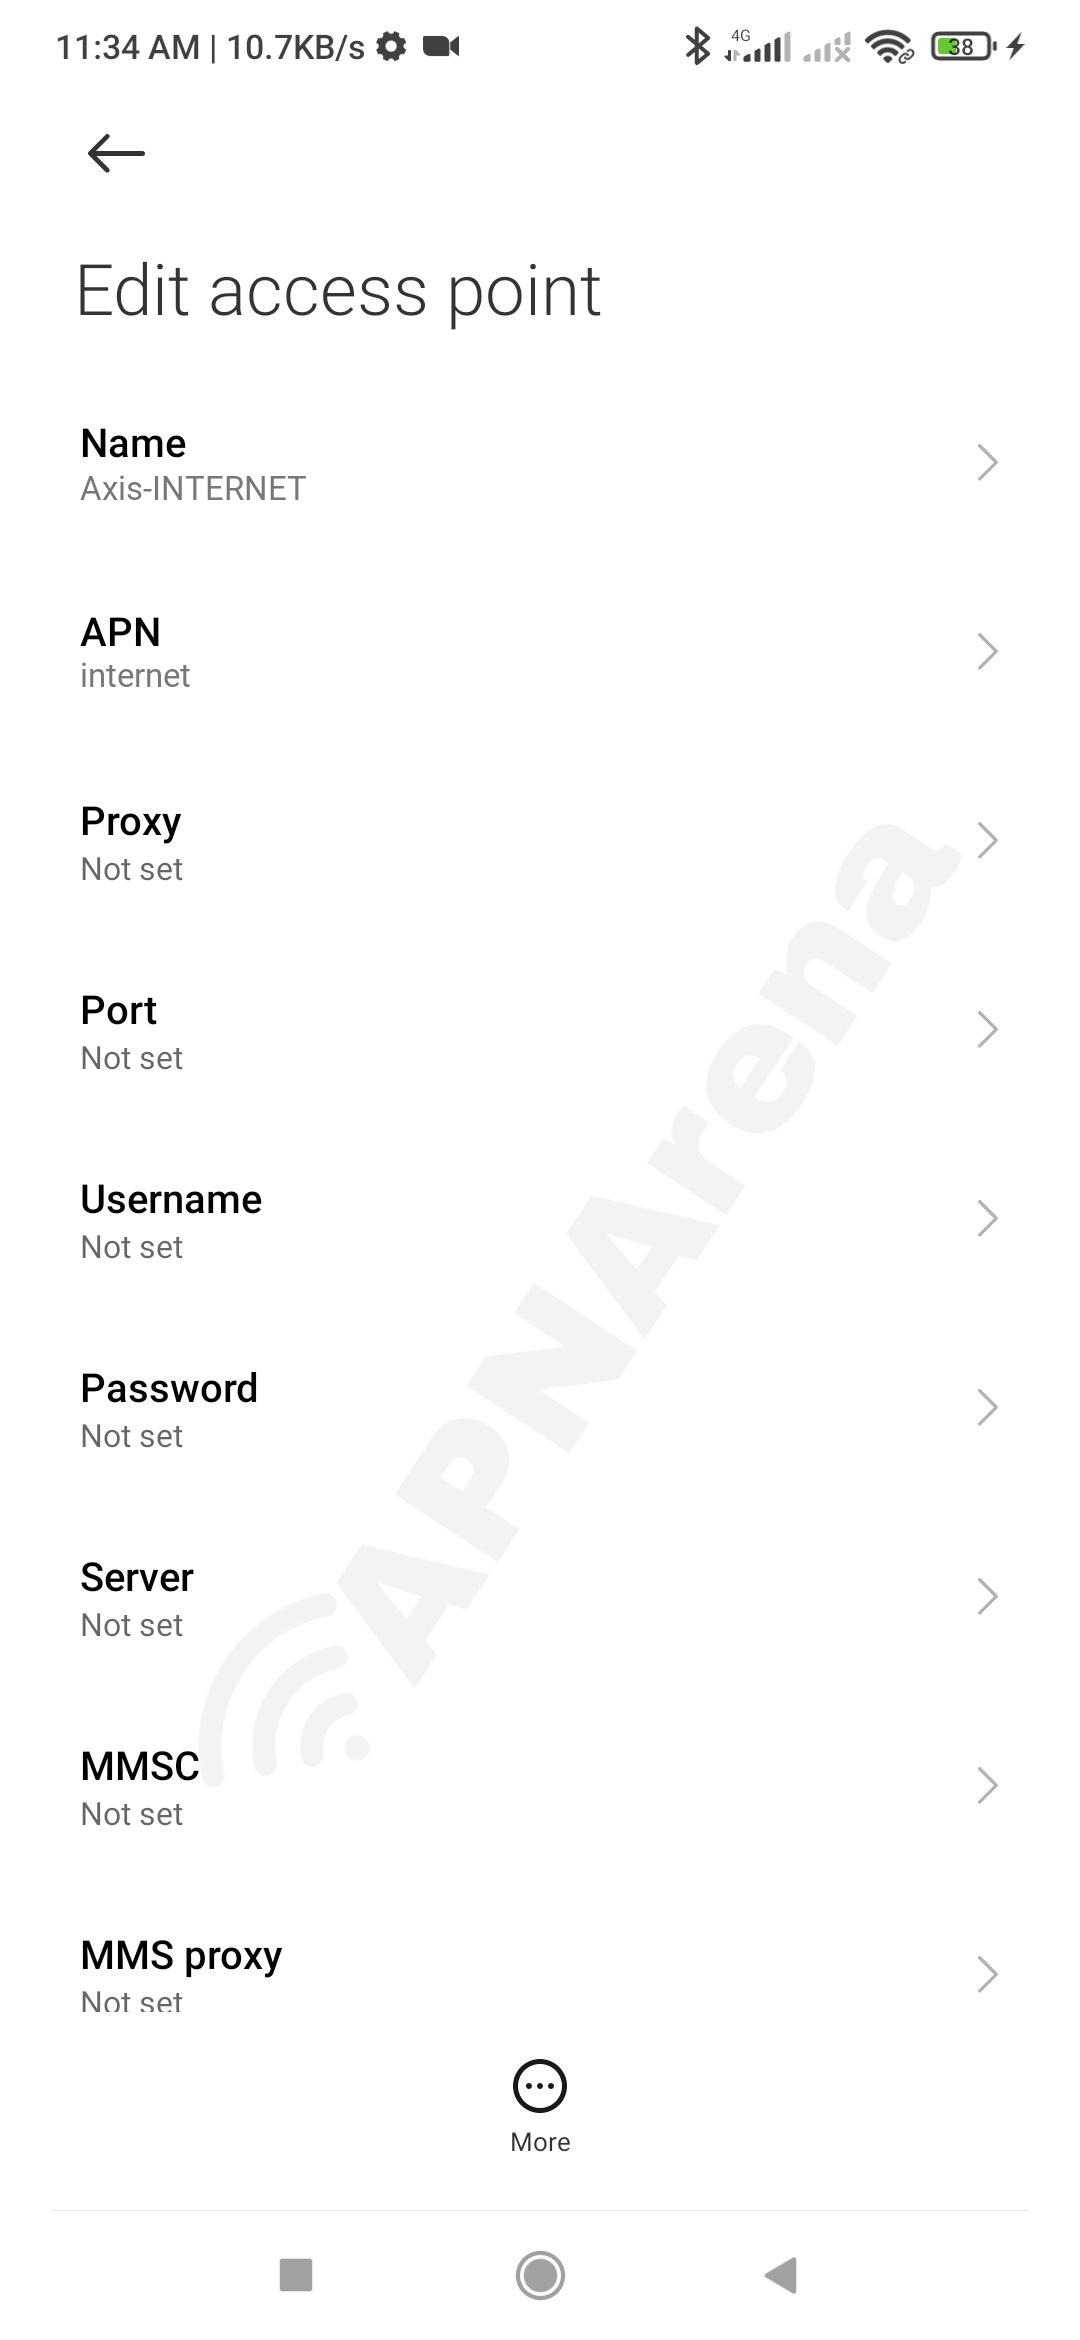 Axis APN Settings for Android